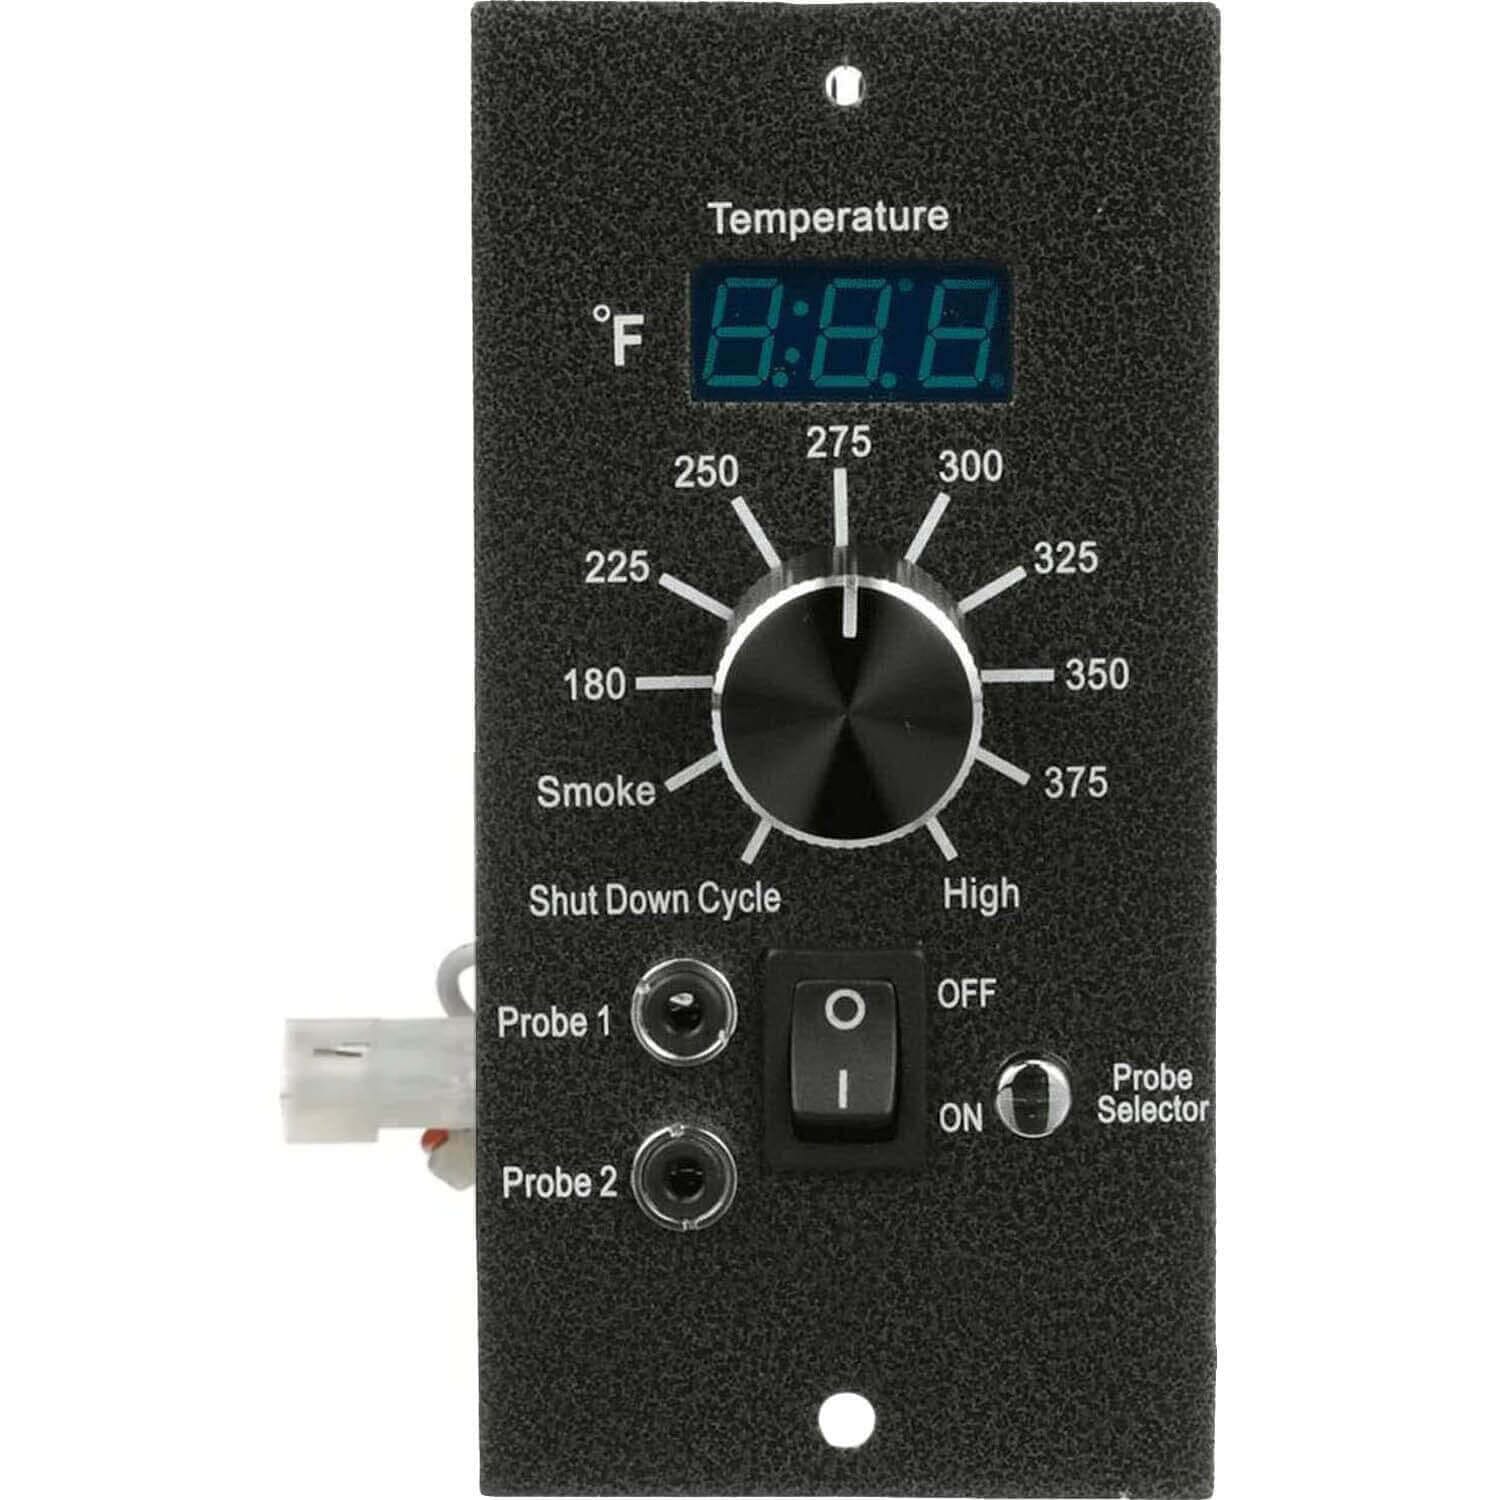 Filter traeger pro 20 Parts By Type: Control Boards